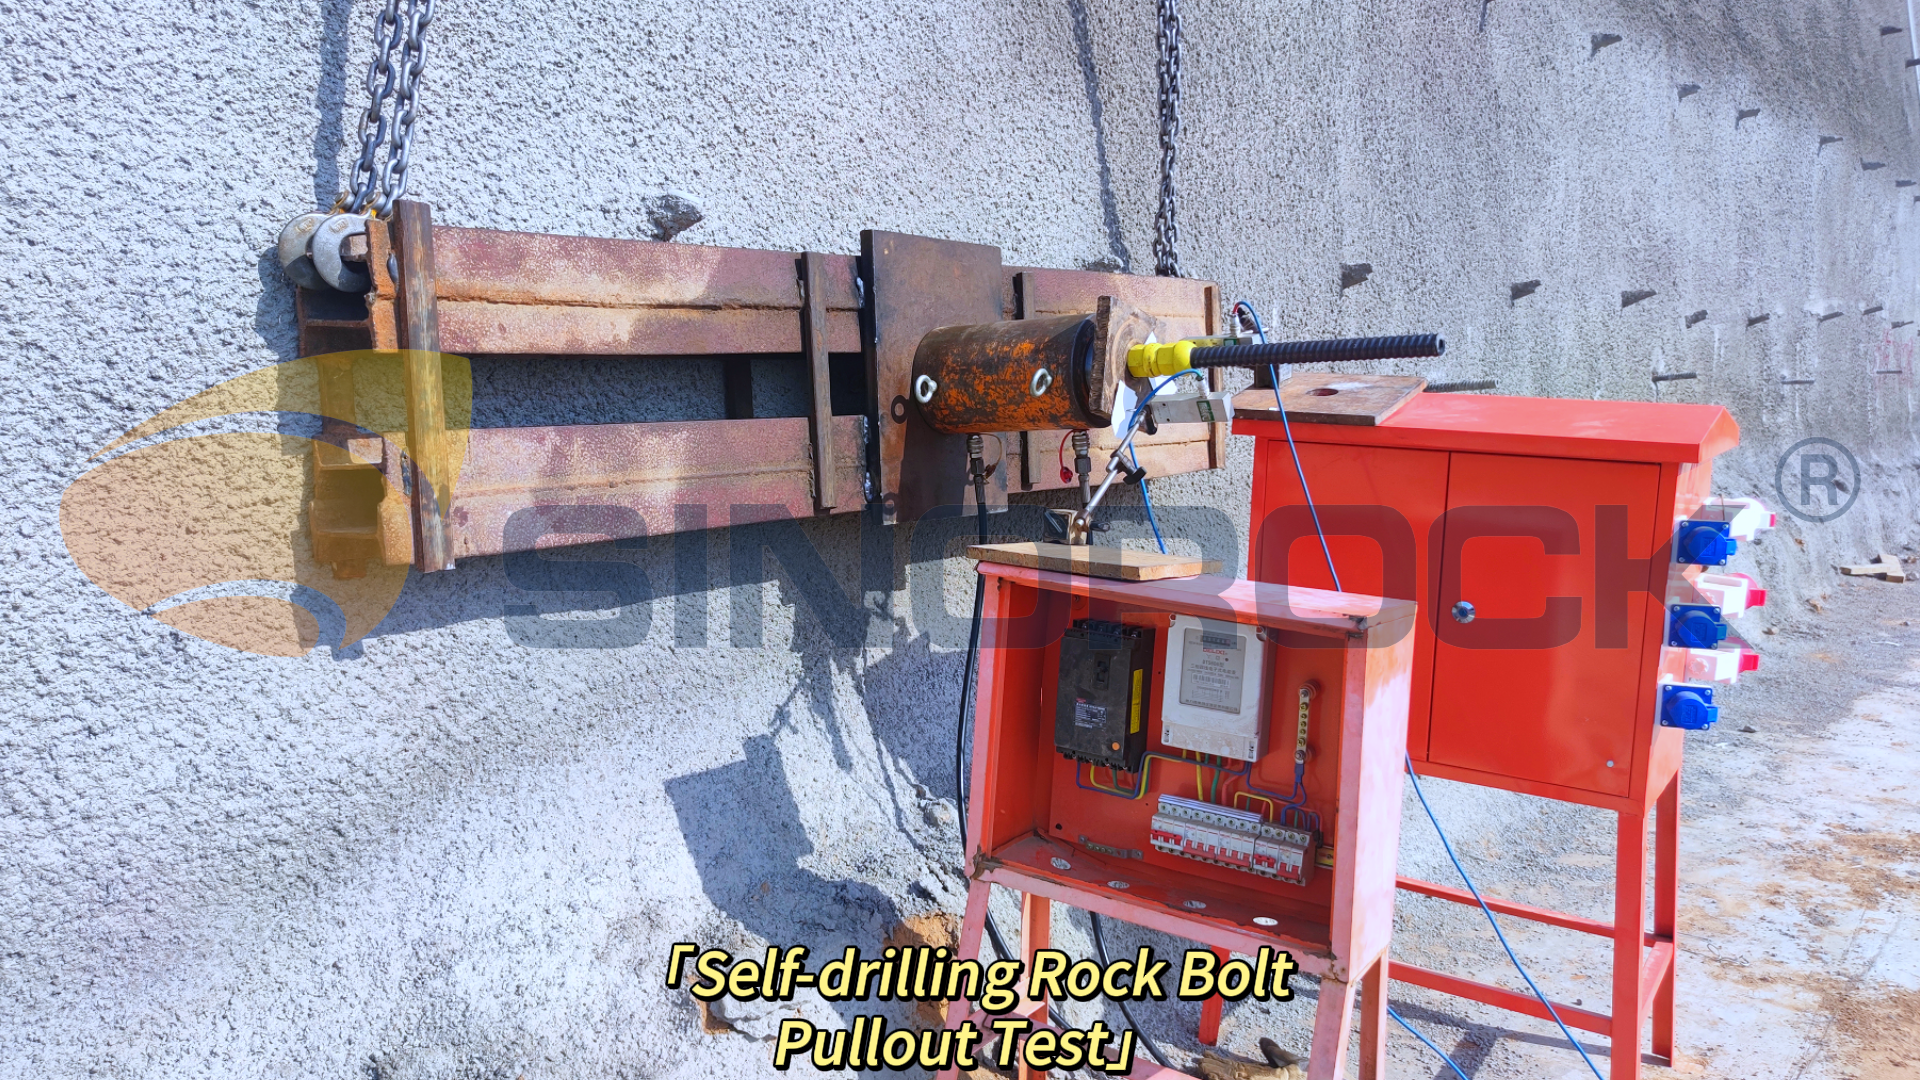 Sinorock-self-drilling-anchor-bolts-pull-out-test